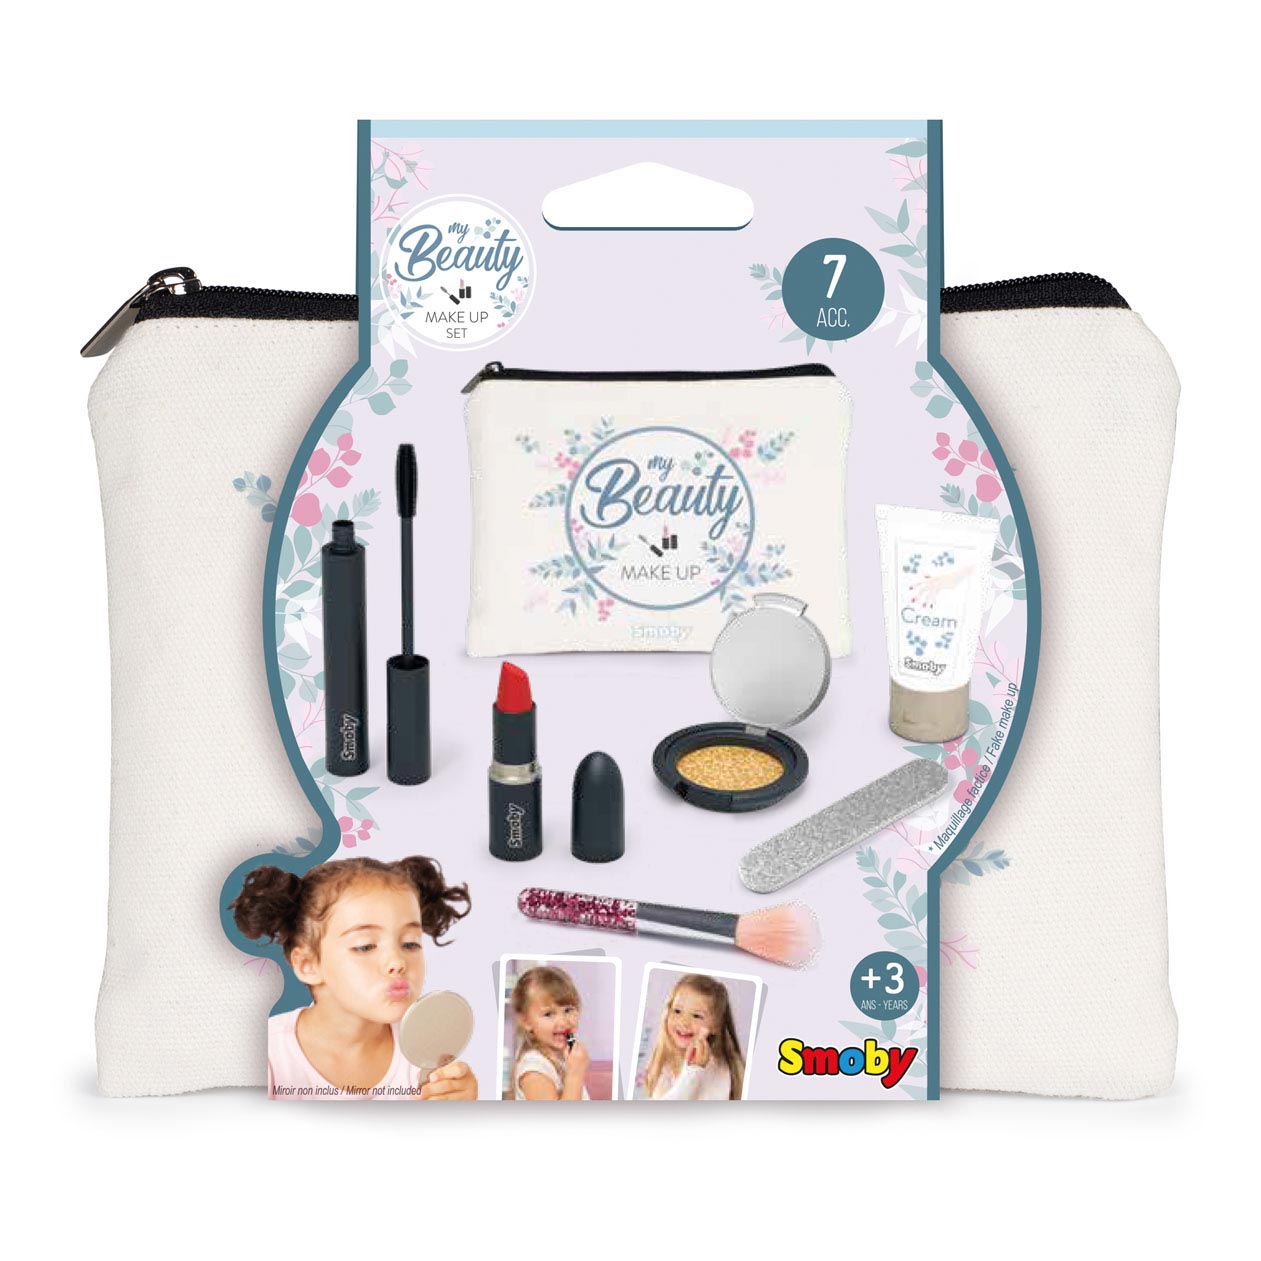 Smoby My Beauty Make Up Set, 7 pieces. | Thimble Toys